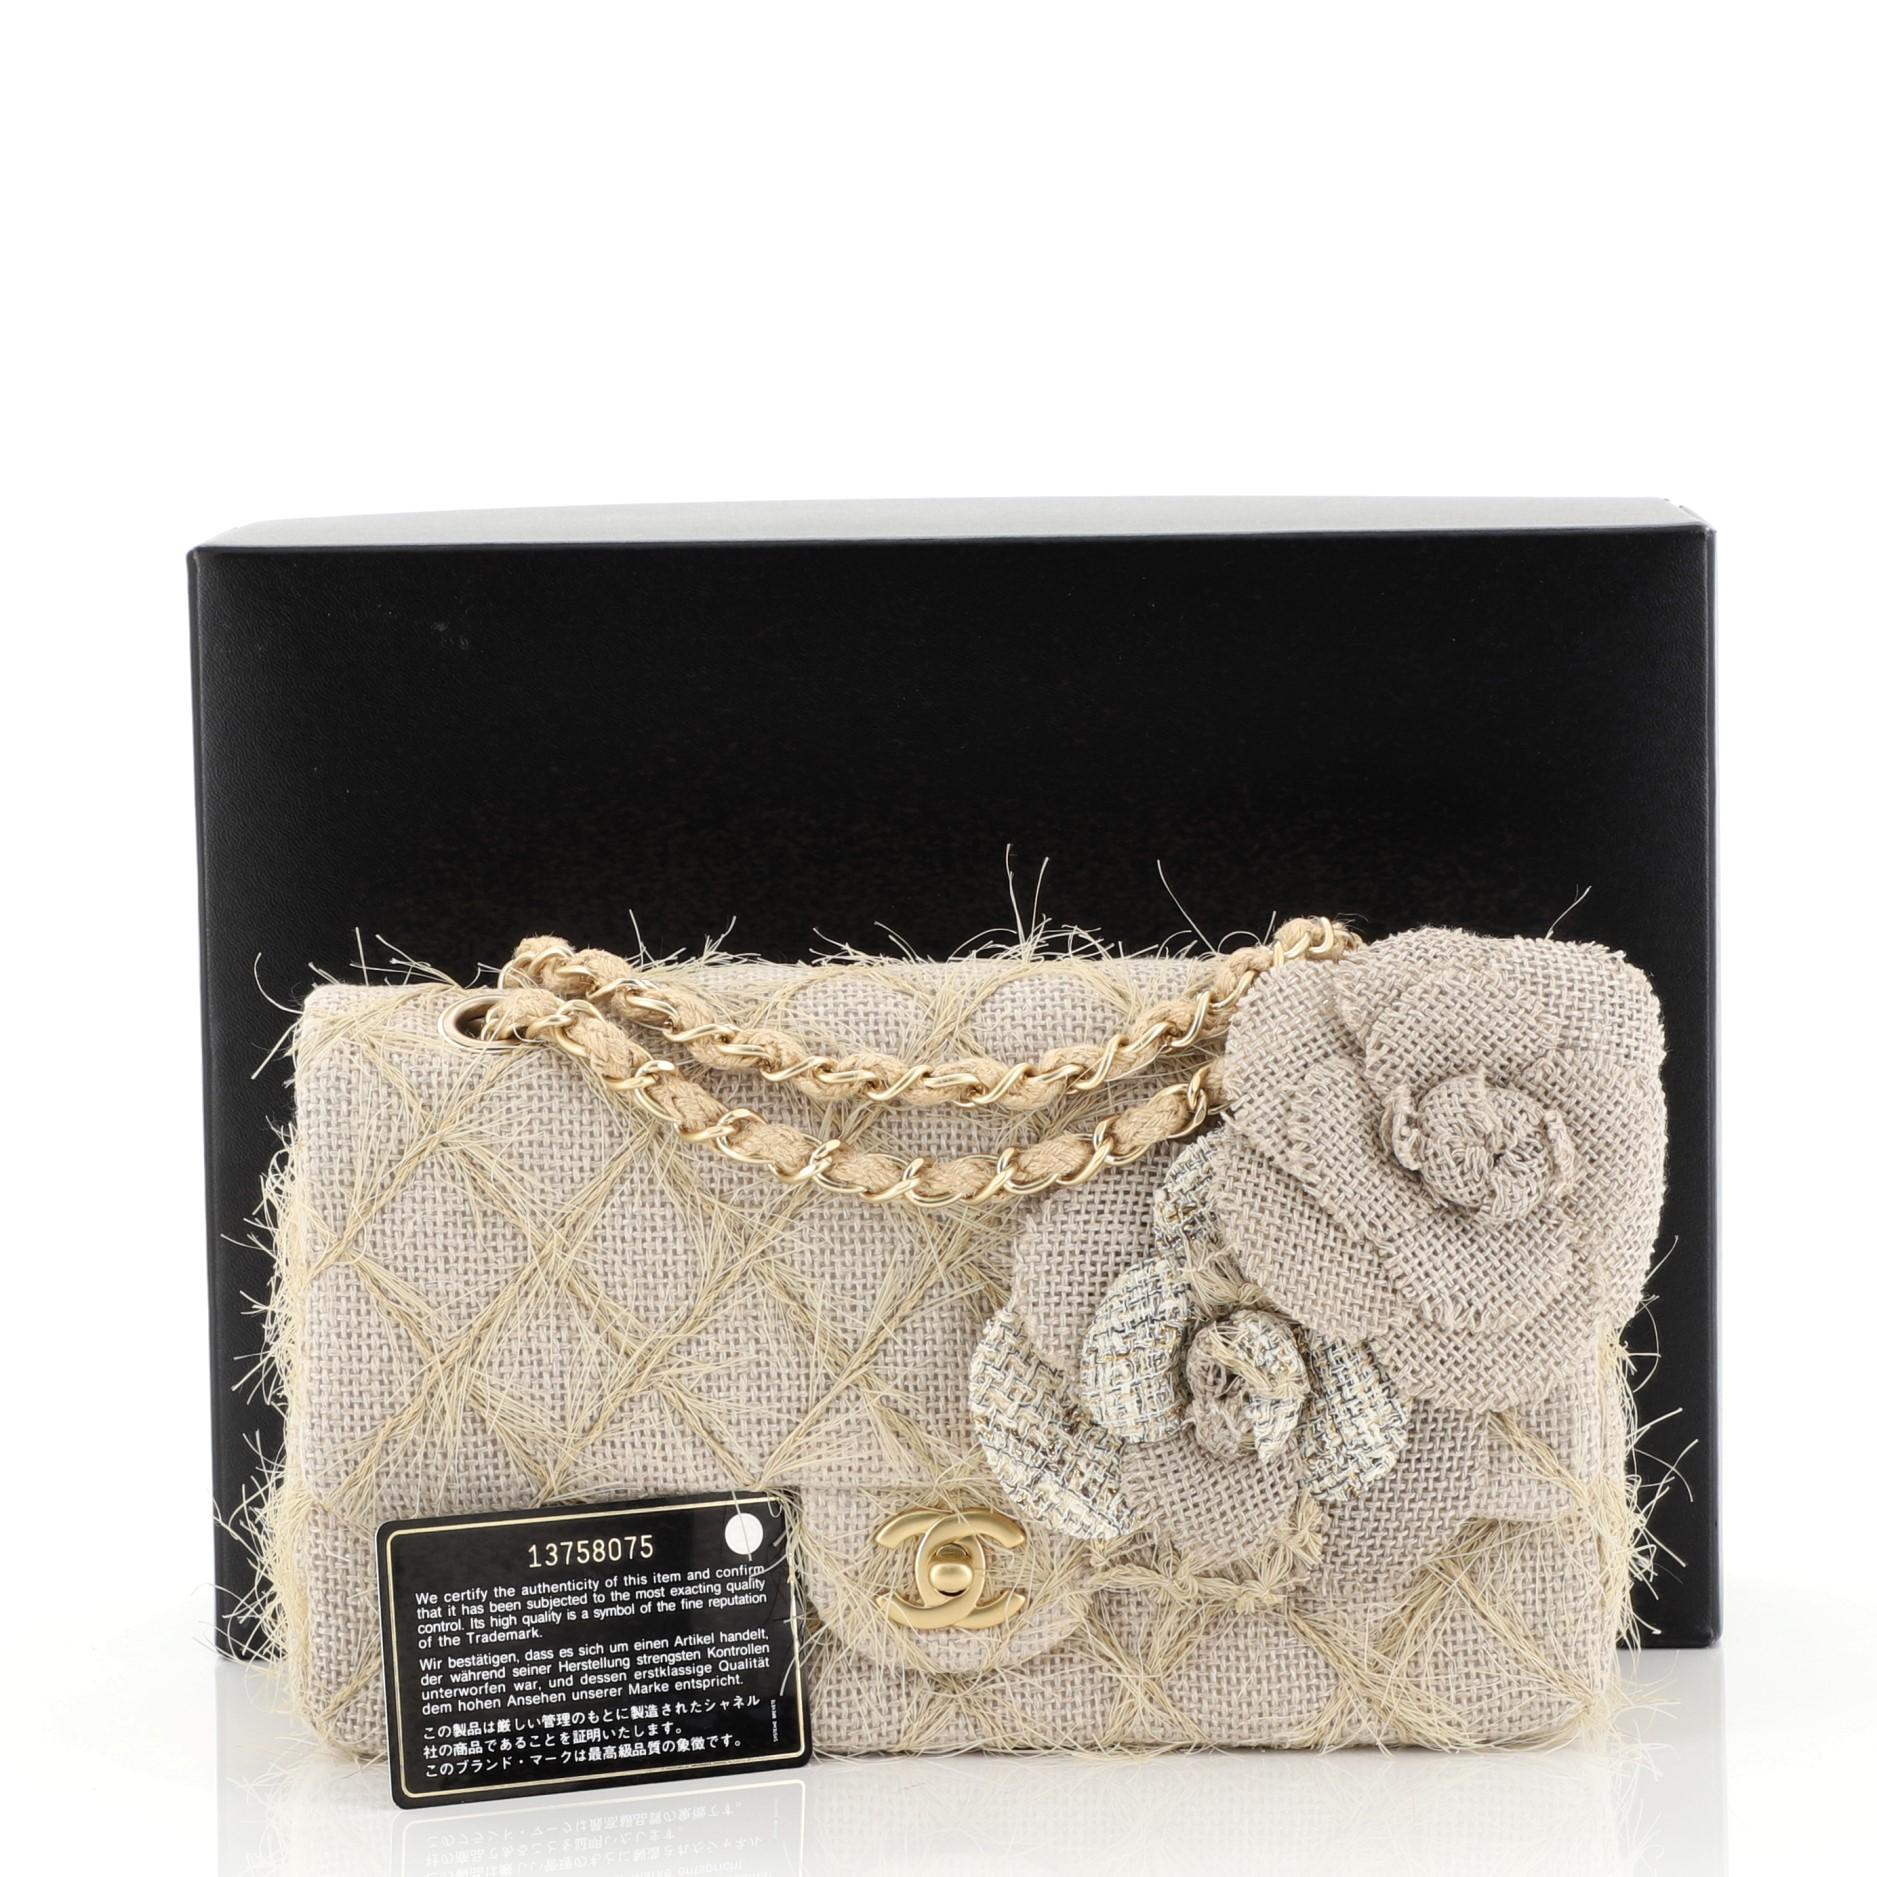 This Chanel Camellia Classic Single Flap Bag Quilted Burlap Medium, crafted from neutral quilted burlap, features quilted straw strands, woven-in chain link strap, exterior back pocket, burlap camellia applique details, and matte gold-tone hardware.